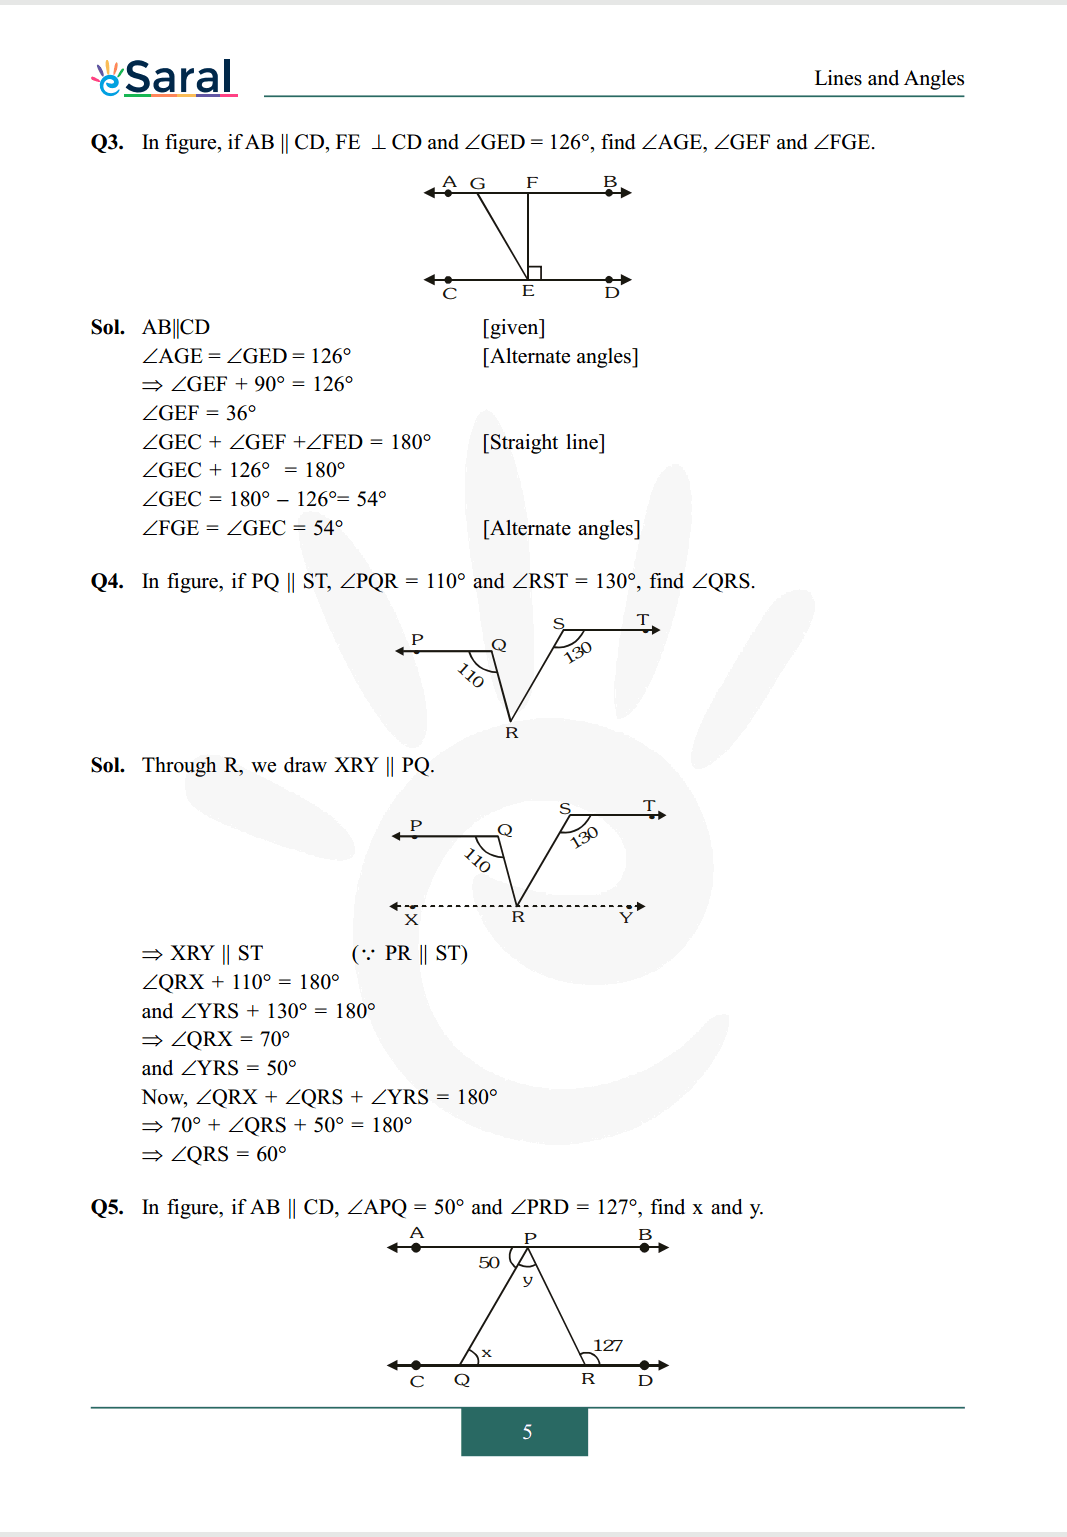 Class 9 maths chapter 6 exercise 6.2 solutions Image 2